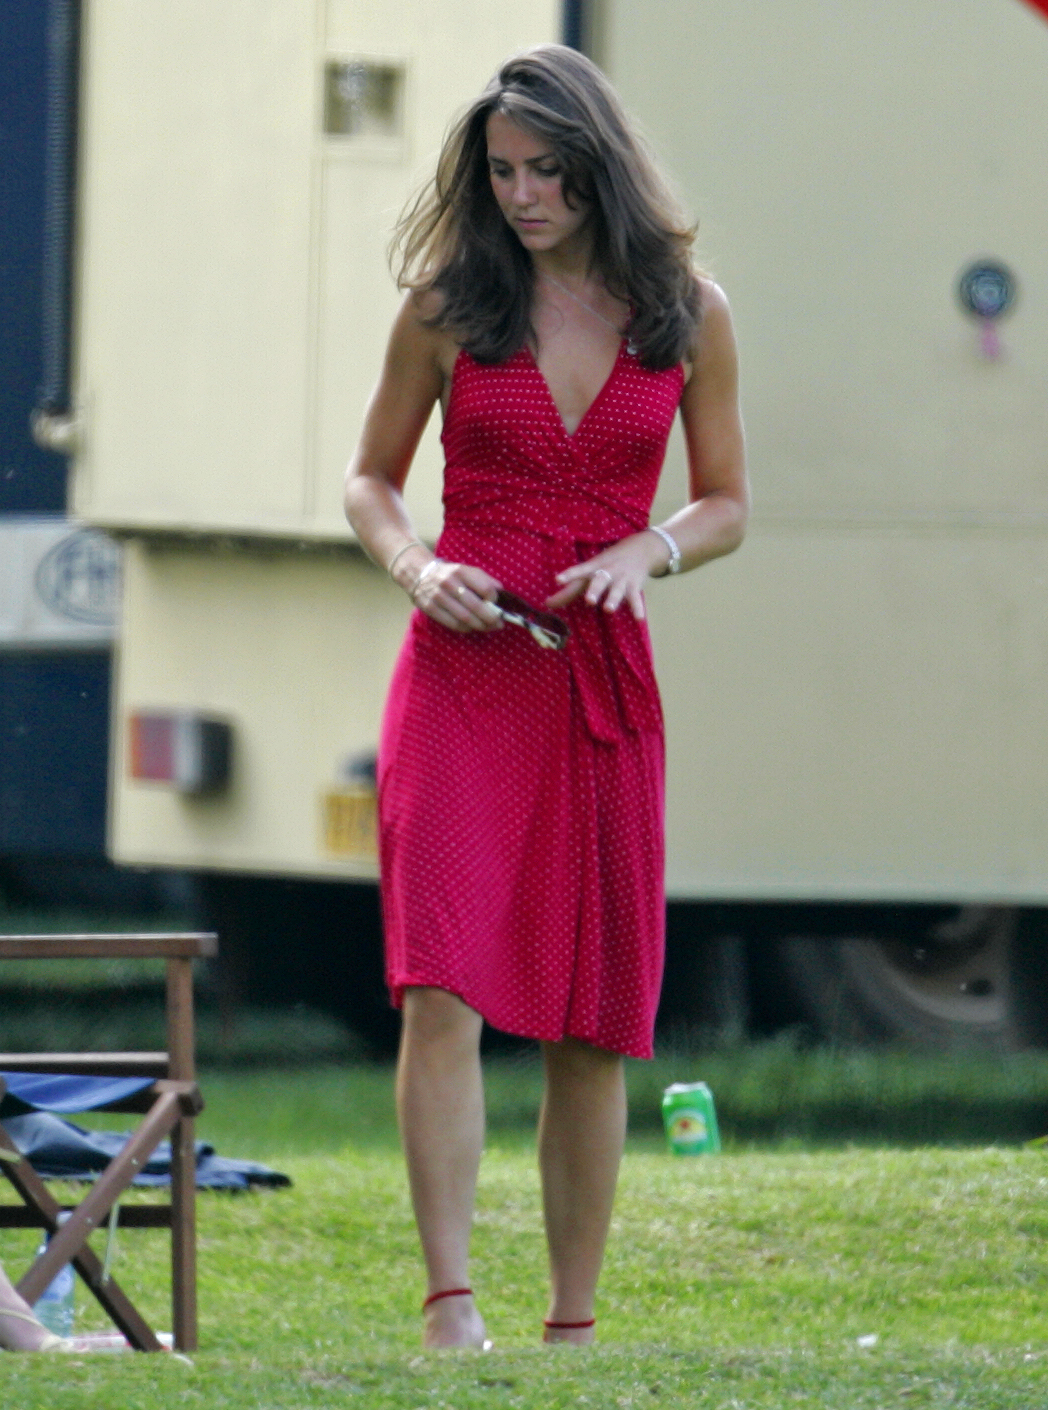 Showing Some Skin
                              Middleton wore a sleeveless polka-dot dress to cheer on Prince William at the Chakravarty Cup charity polo match on June 17, 2006.